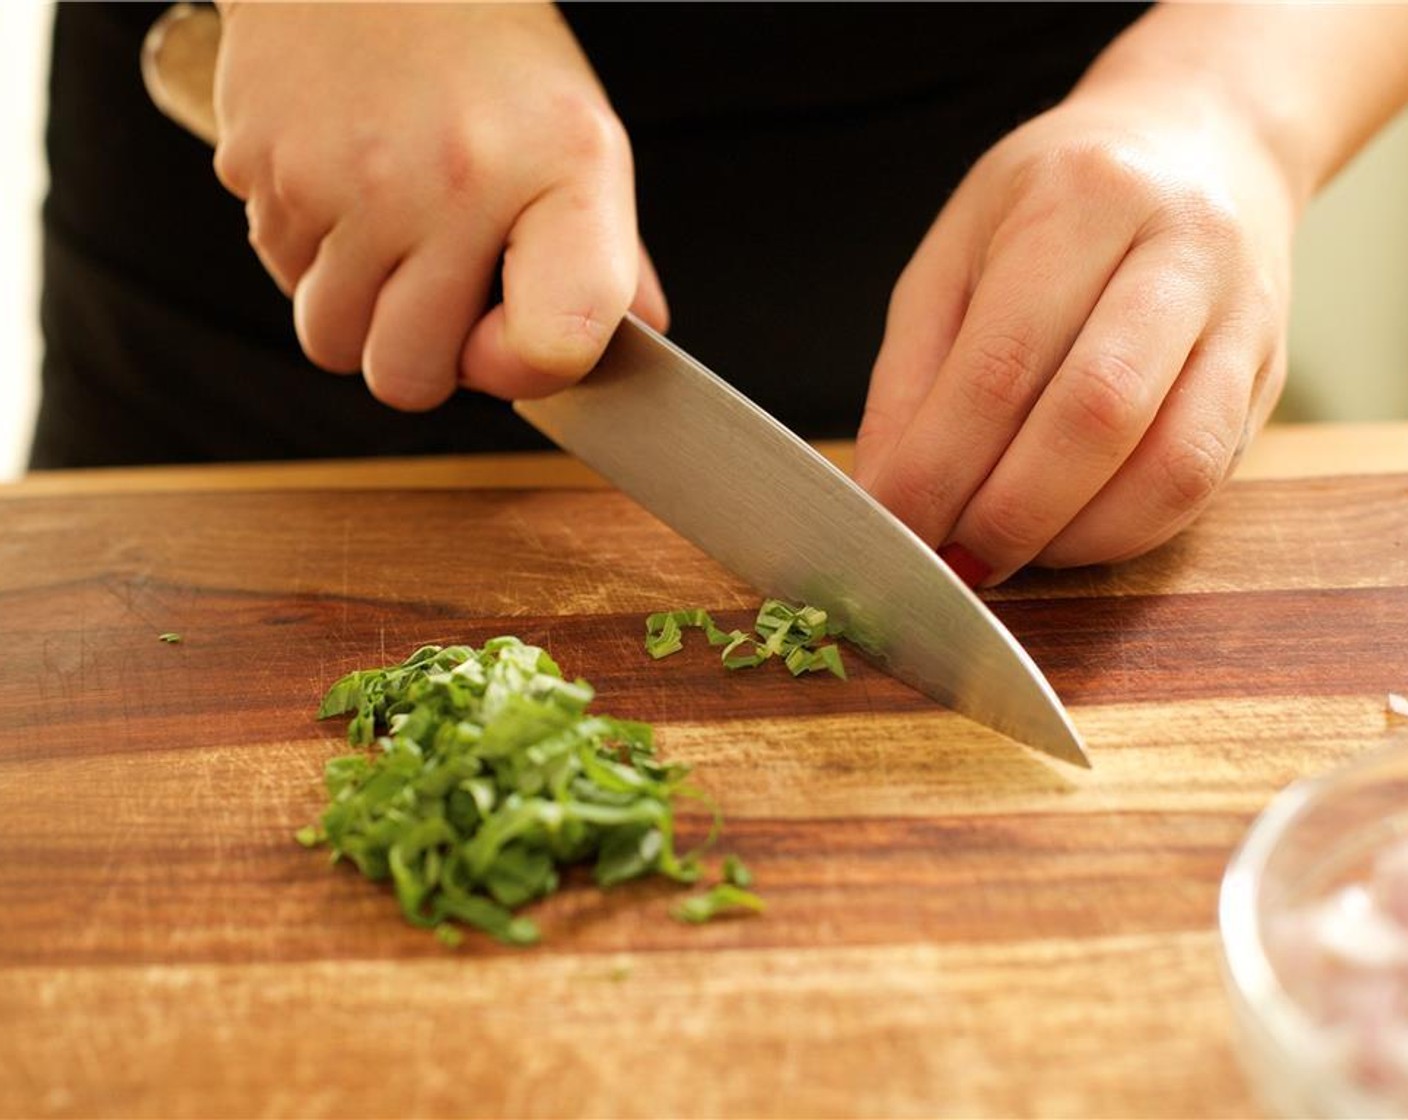 step 4 Remove the Fresh Parsley (3 Tbsp) and Fresh Basil (1/2 cup) leaves from the stems. Discard stems. Roughly chop basil leaves. Set herbs apart separately.